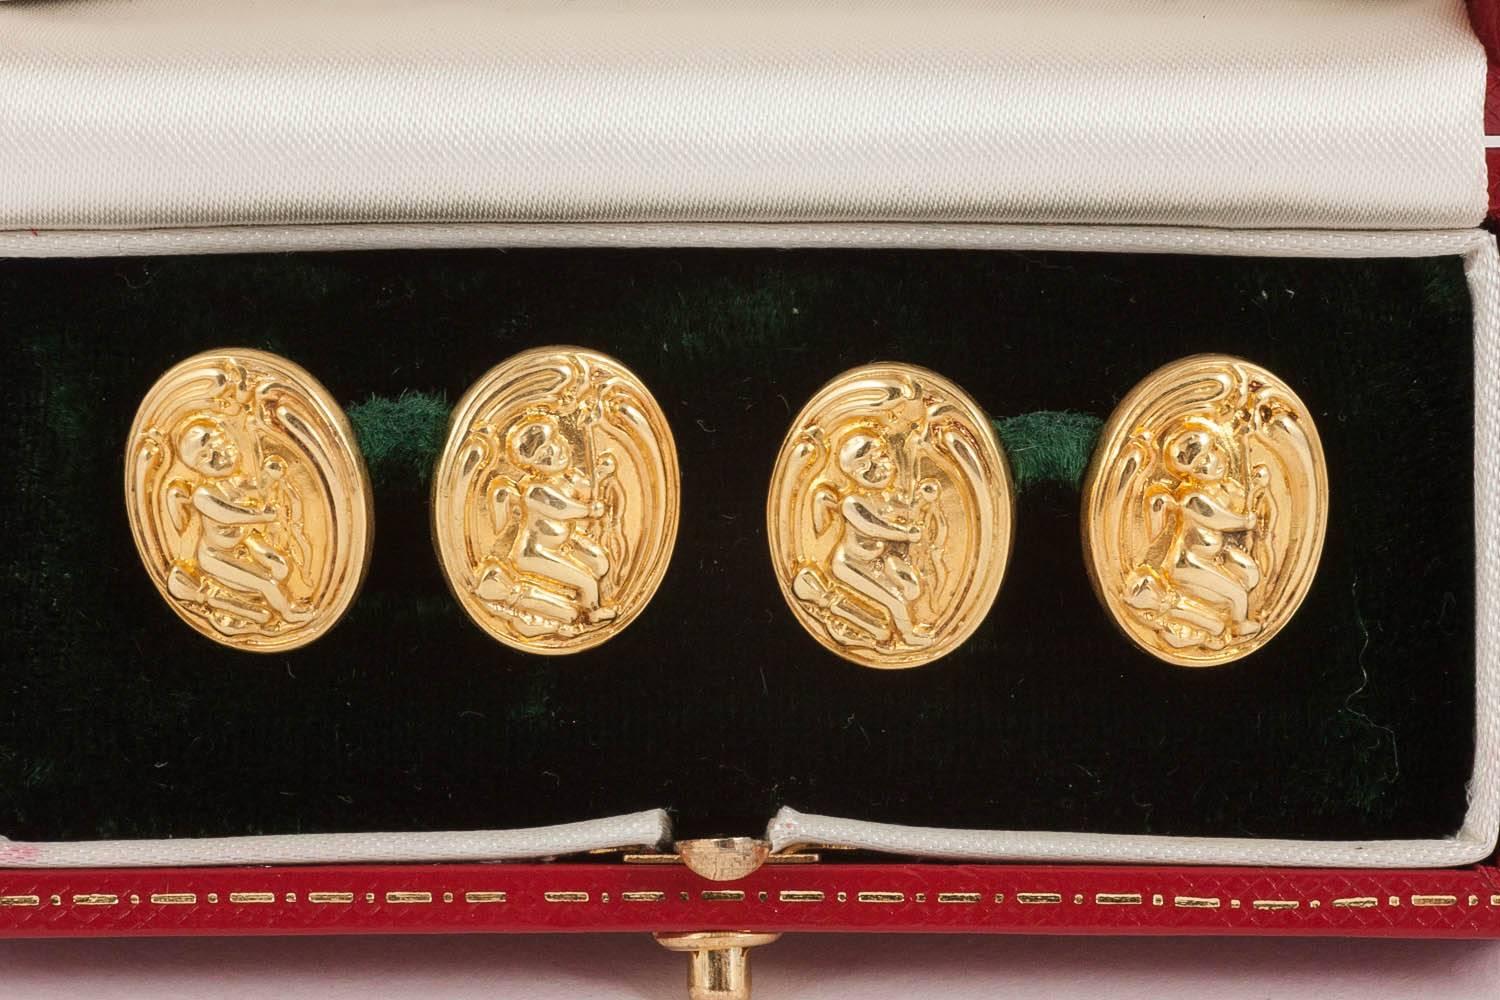 Antique cufflinks in 15 carat yellow gold of winged cherubs playing a musical instrument. Double sided with oval link connection and of good colour and condition. From the Art Nouveau period.
Measures 16mm in height x 13mm in width.
Antique piece